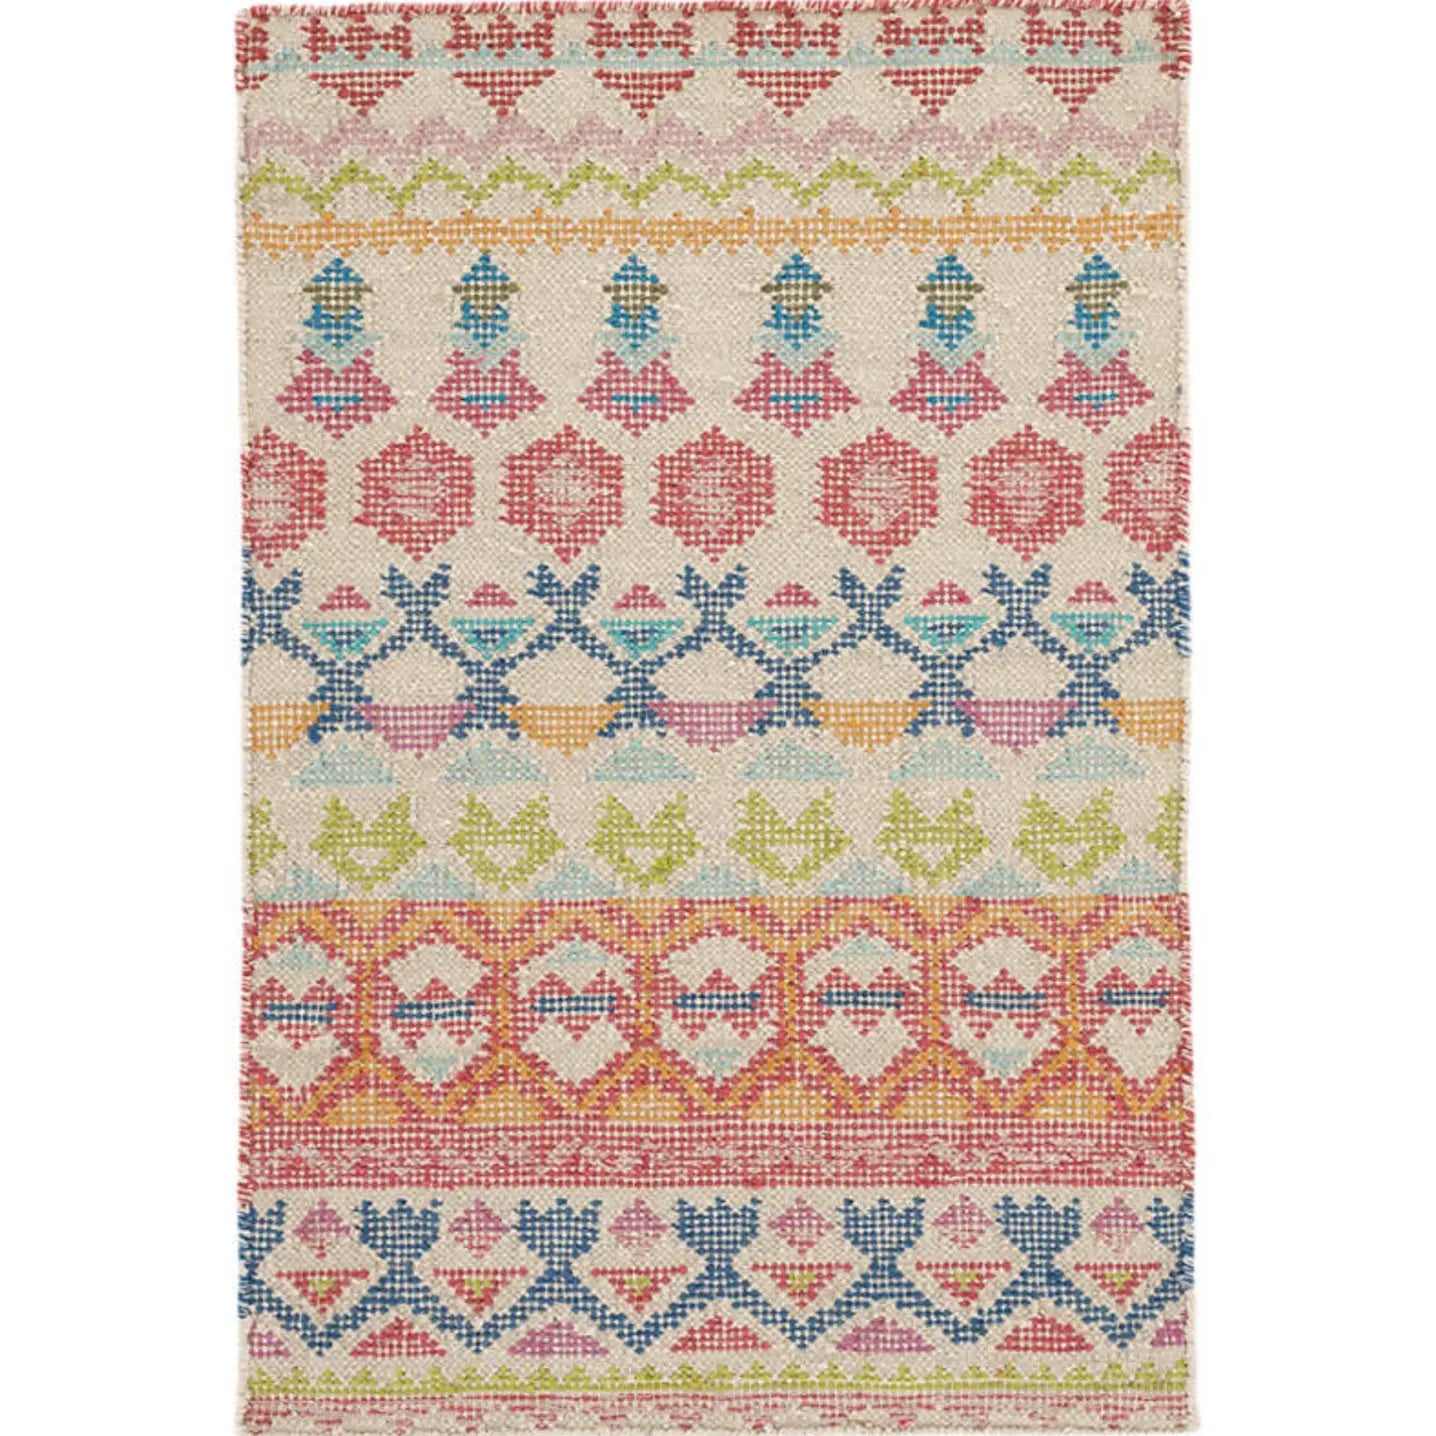 Stony Brook Multi Loom Knotted Cotton Rug - Home Smith